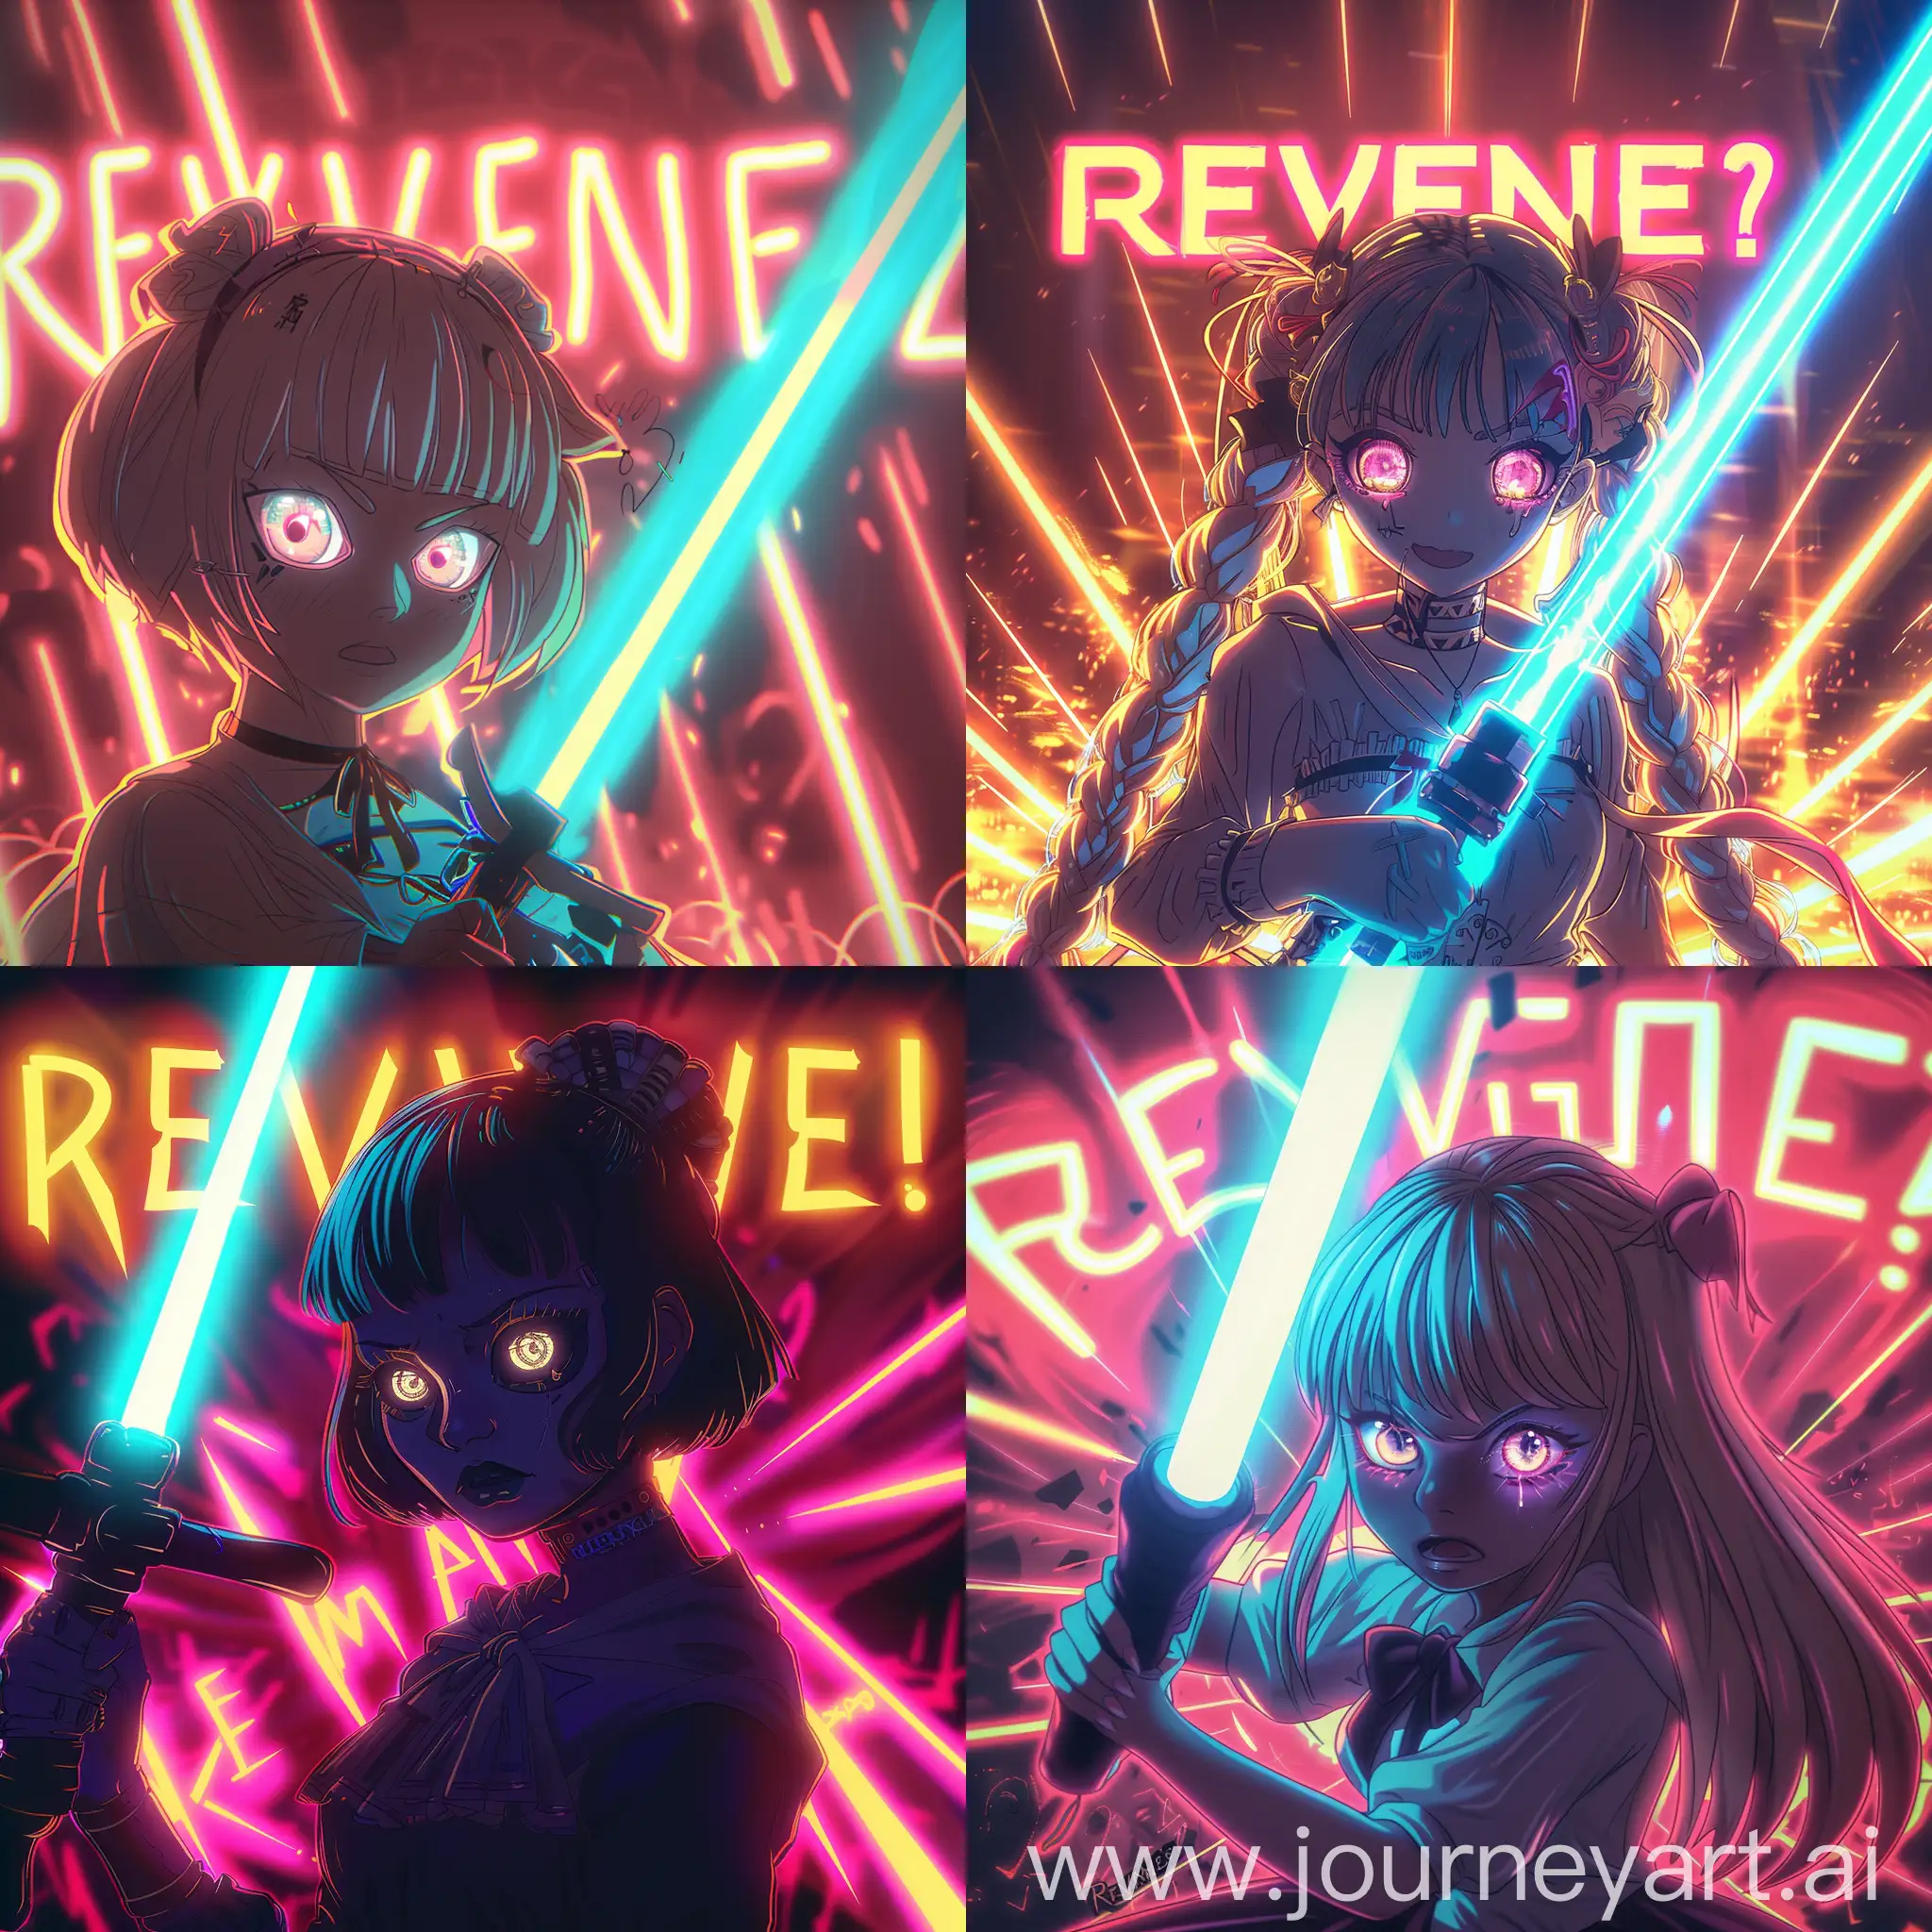 Glowing-Eyes-Phonk-Girl-with-Saber-in-Neon-Light